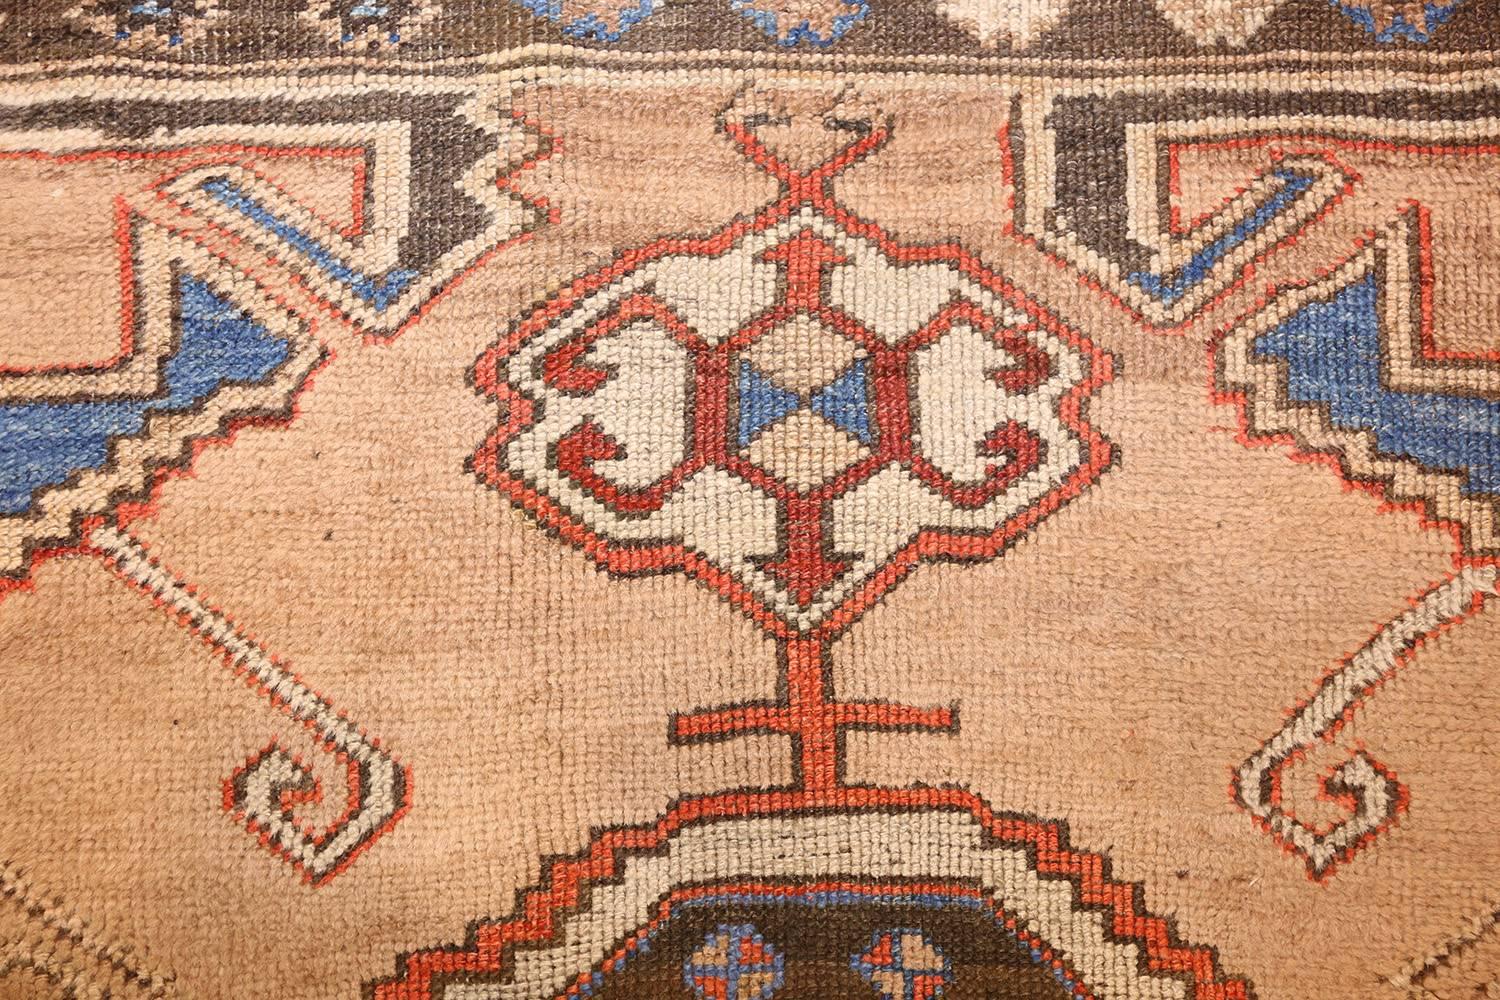 Hand-Knotted Small Scatter Size Tribal Antique Turkish Karapinar Rug